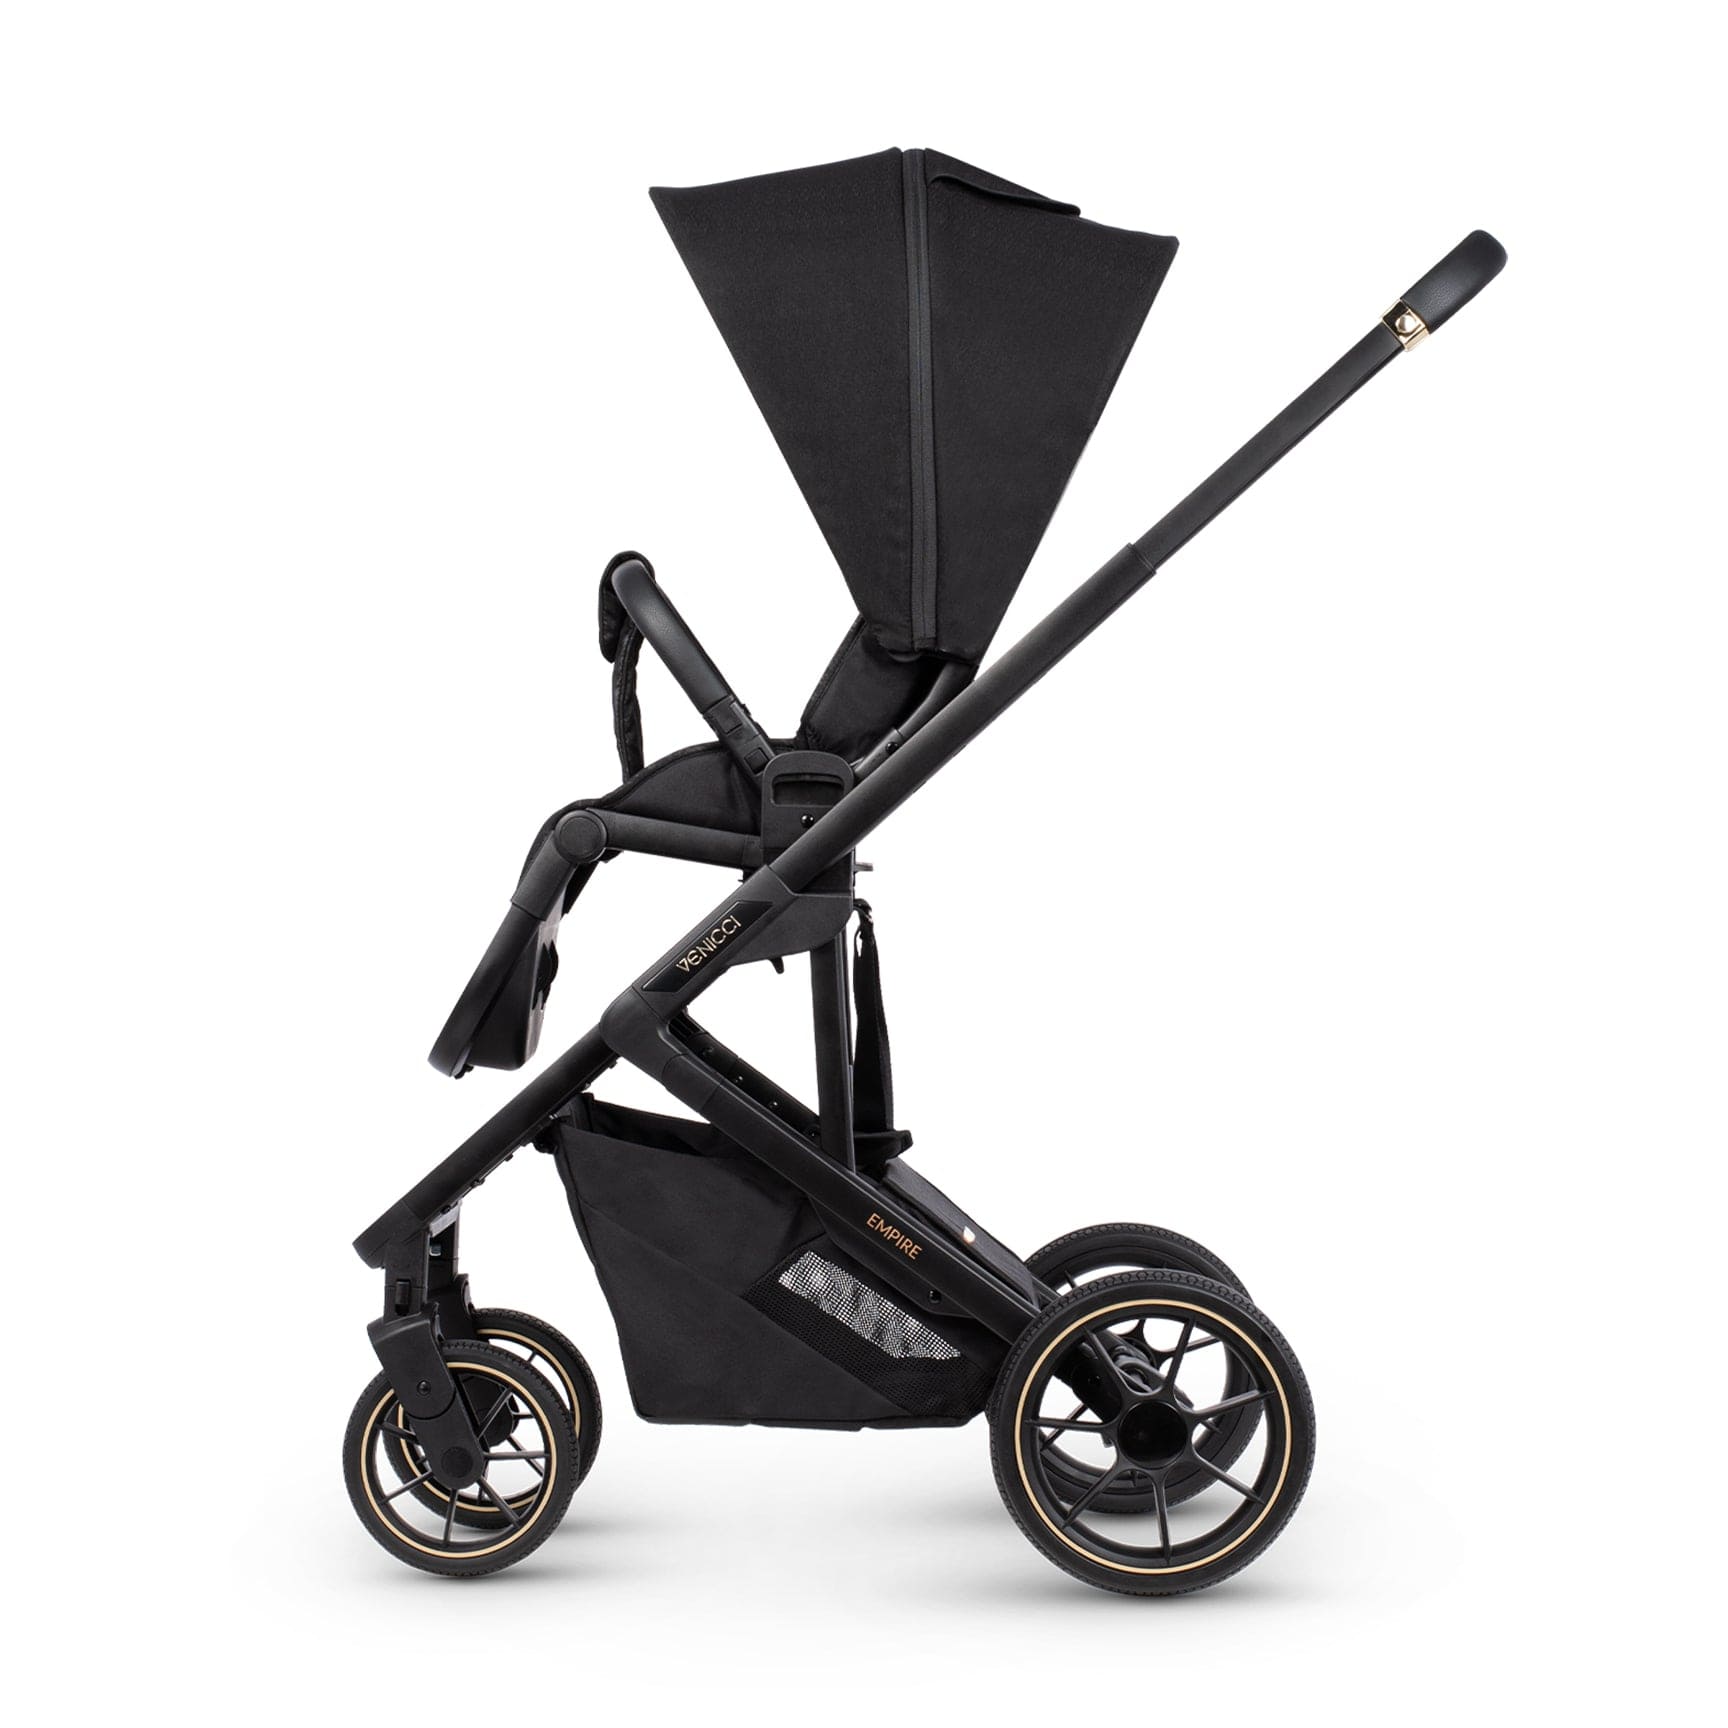 Venicci Empire Stroller & Accessory Pack in Ultra Black Pushchairs & Buggies 13175-ULT-BLK 5905261331168